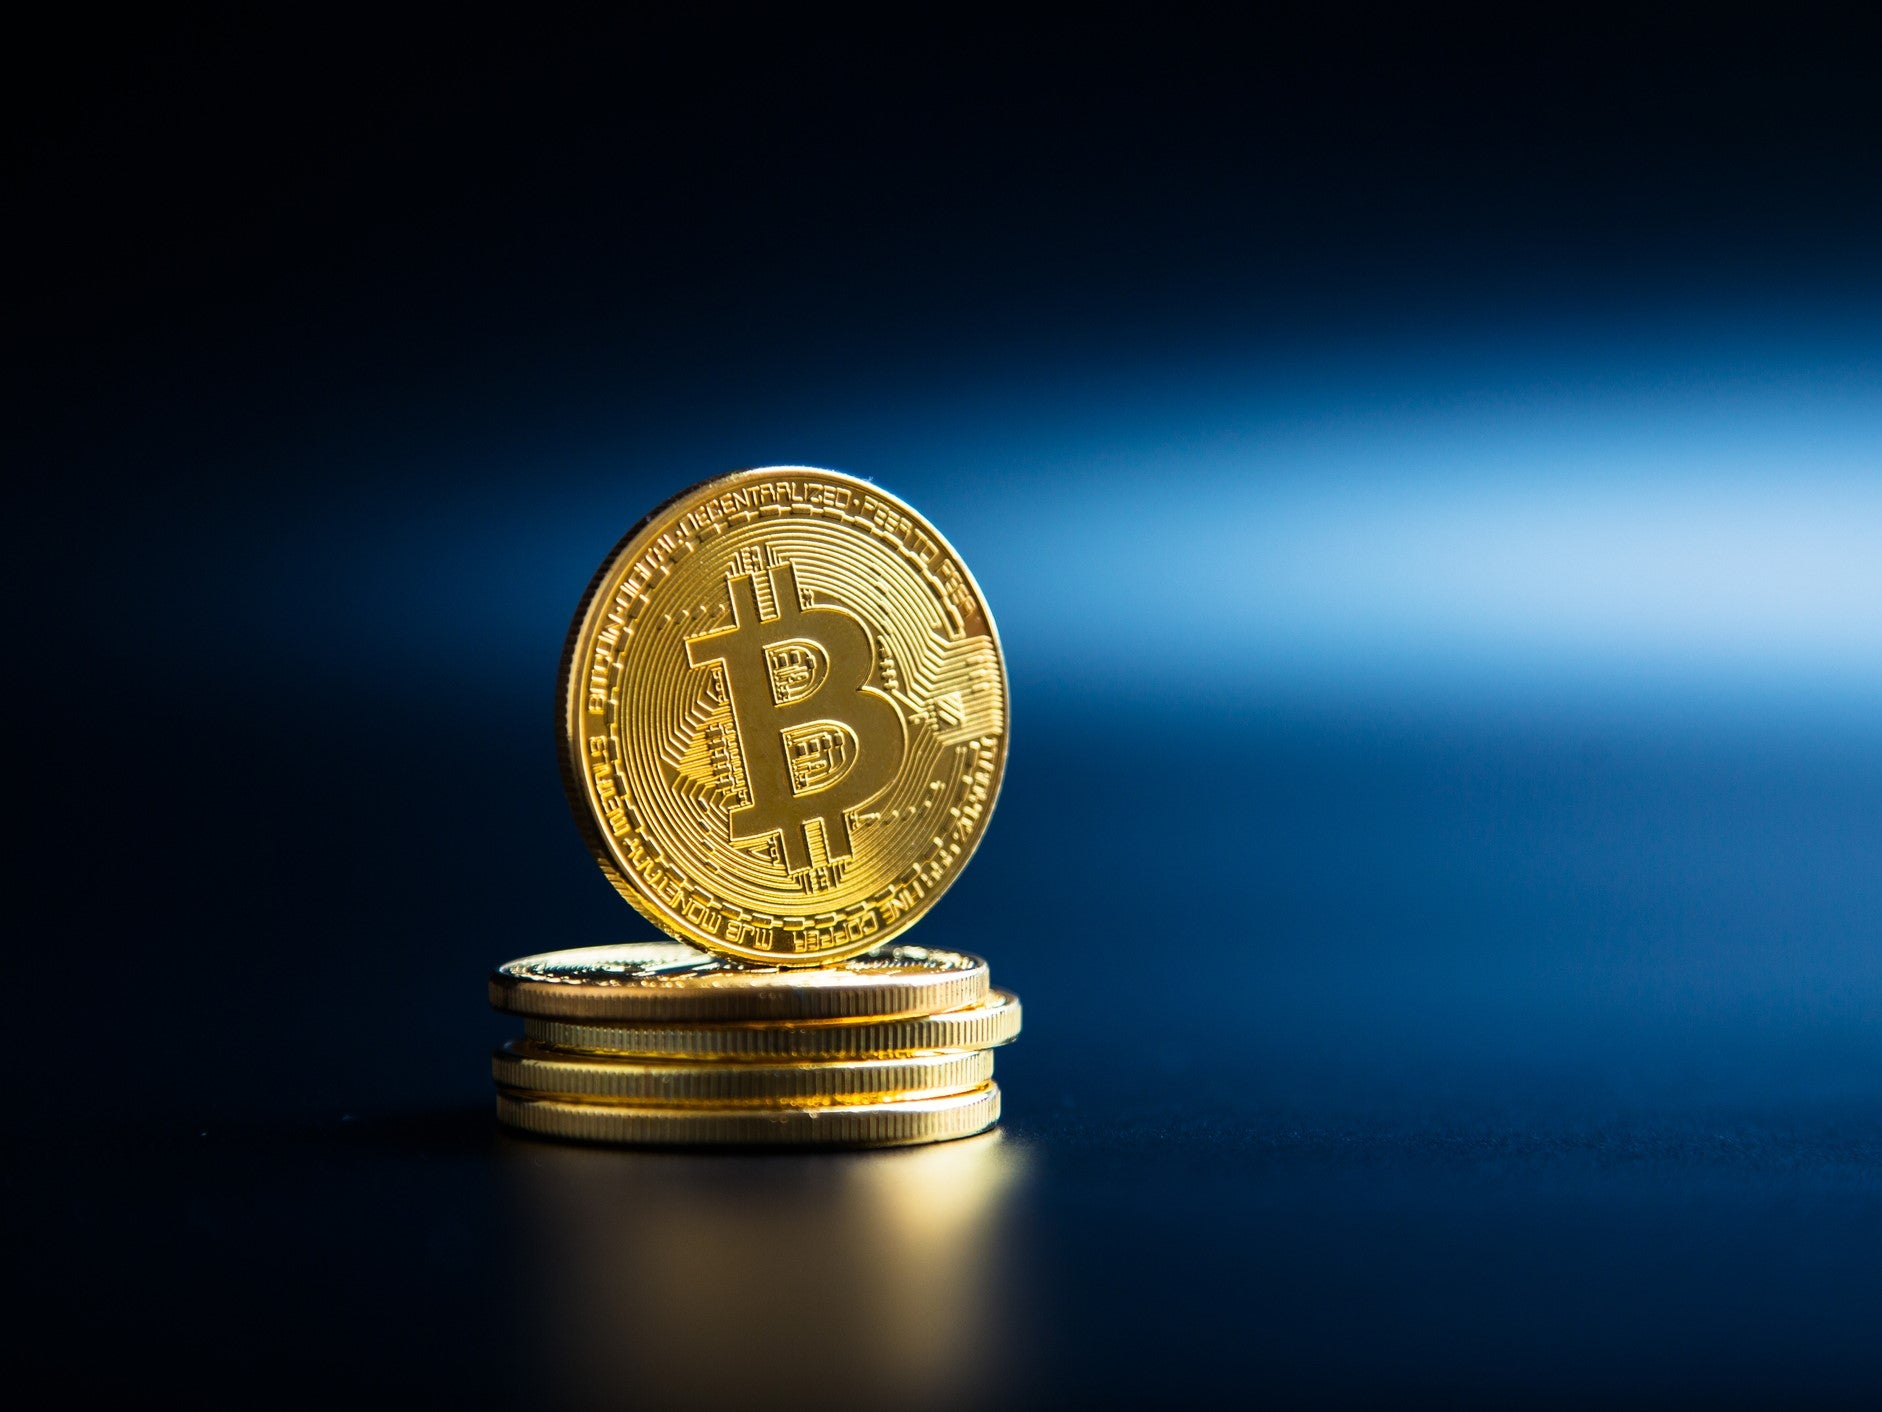 Bitcoin has faced extreme market volatility in 2021 amid wild speculation about the cryptocurrency’s future